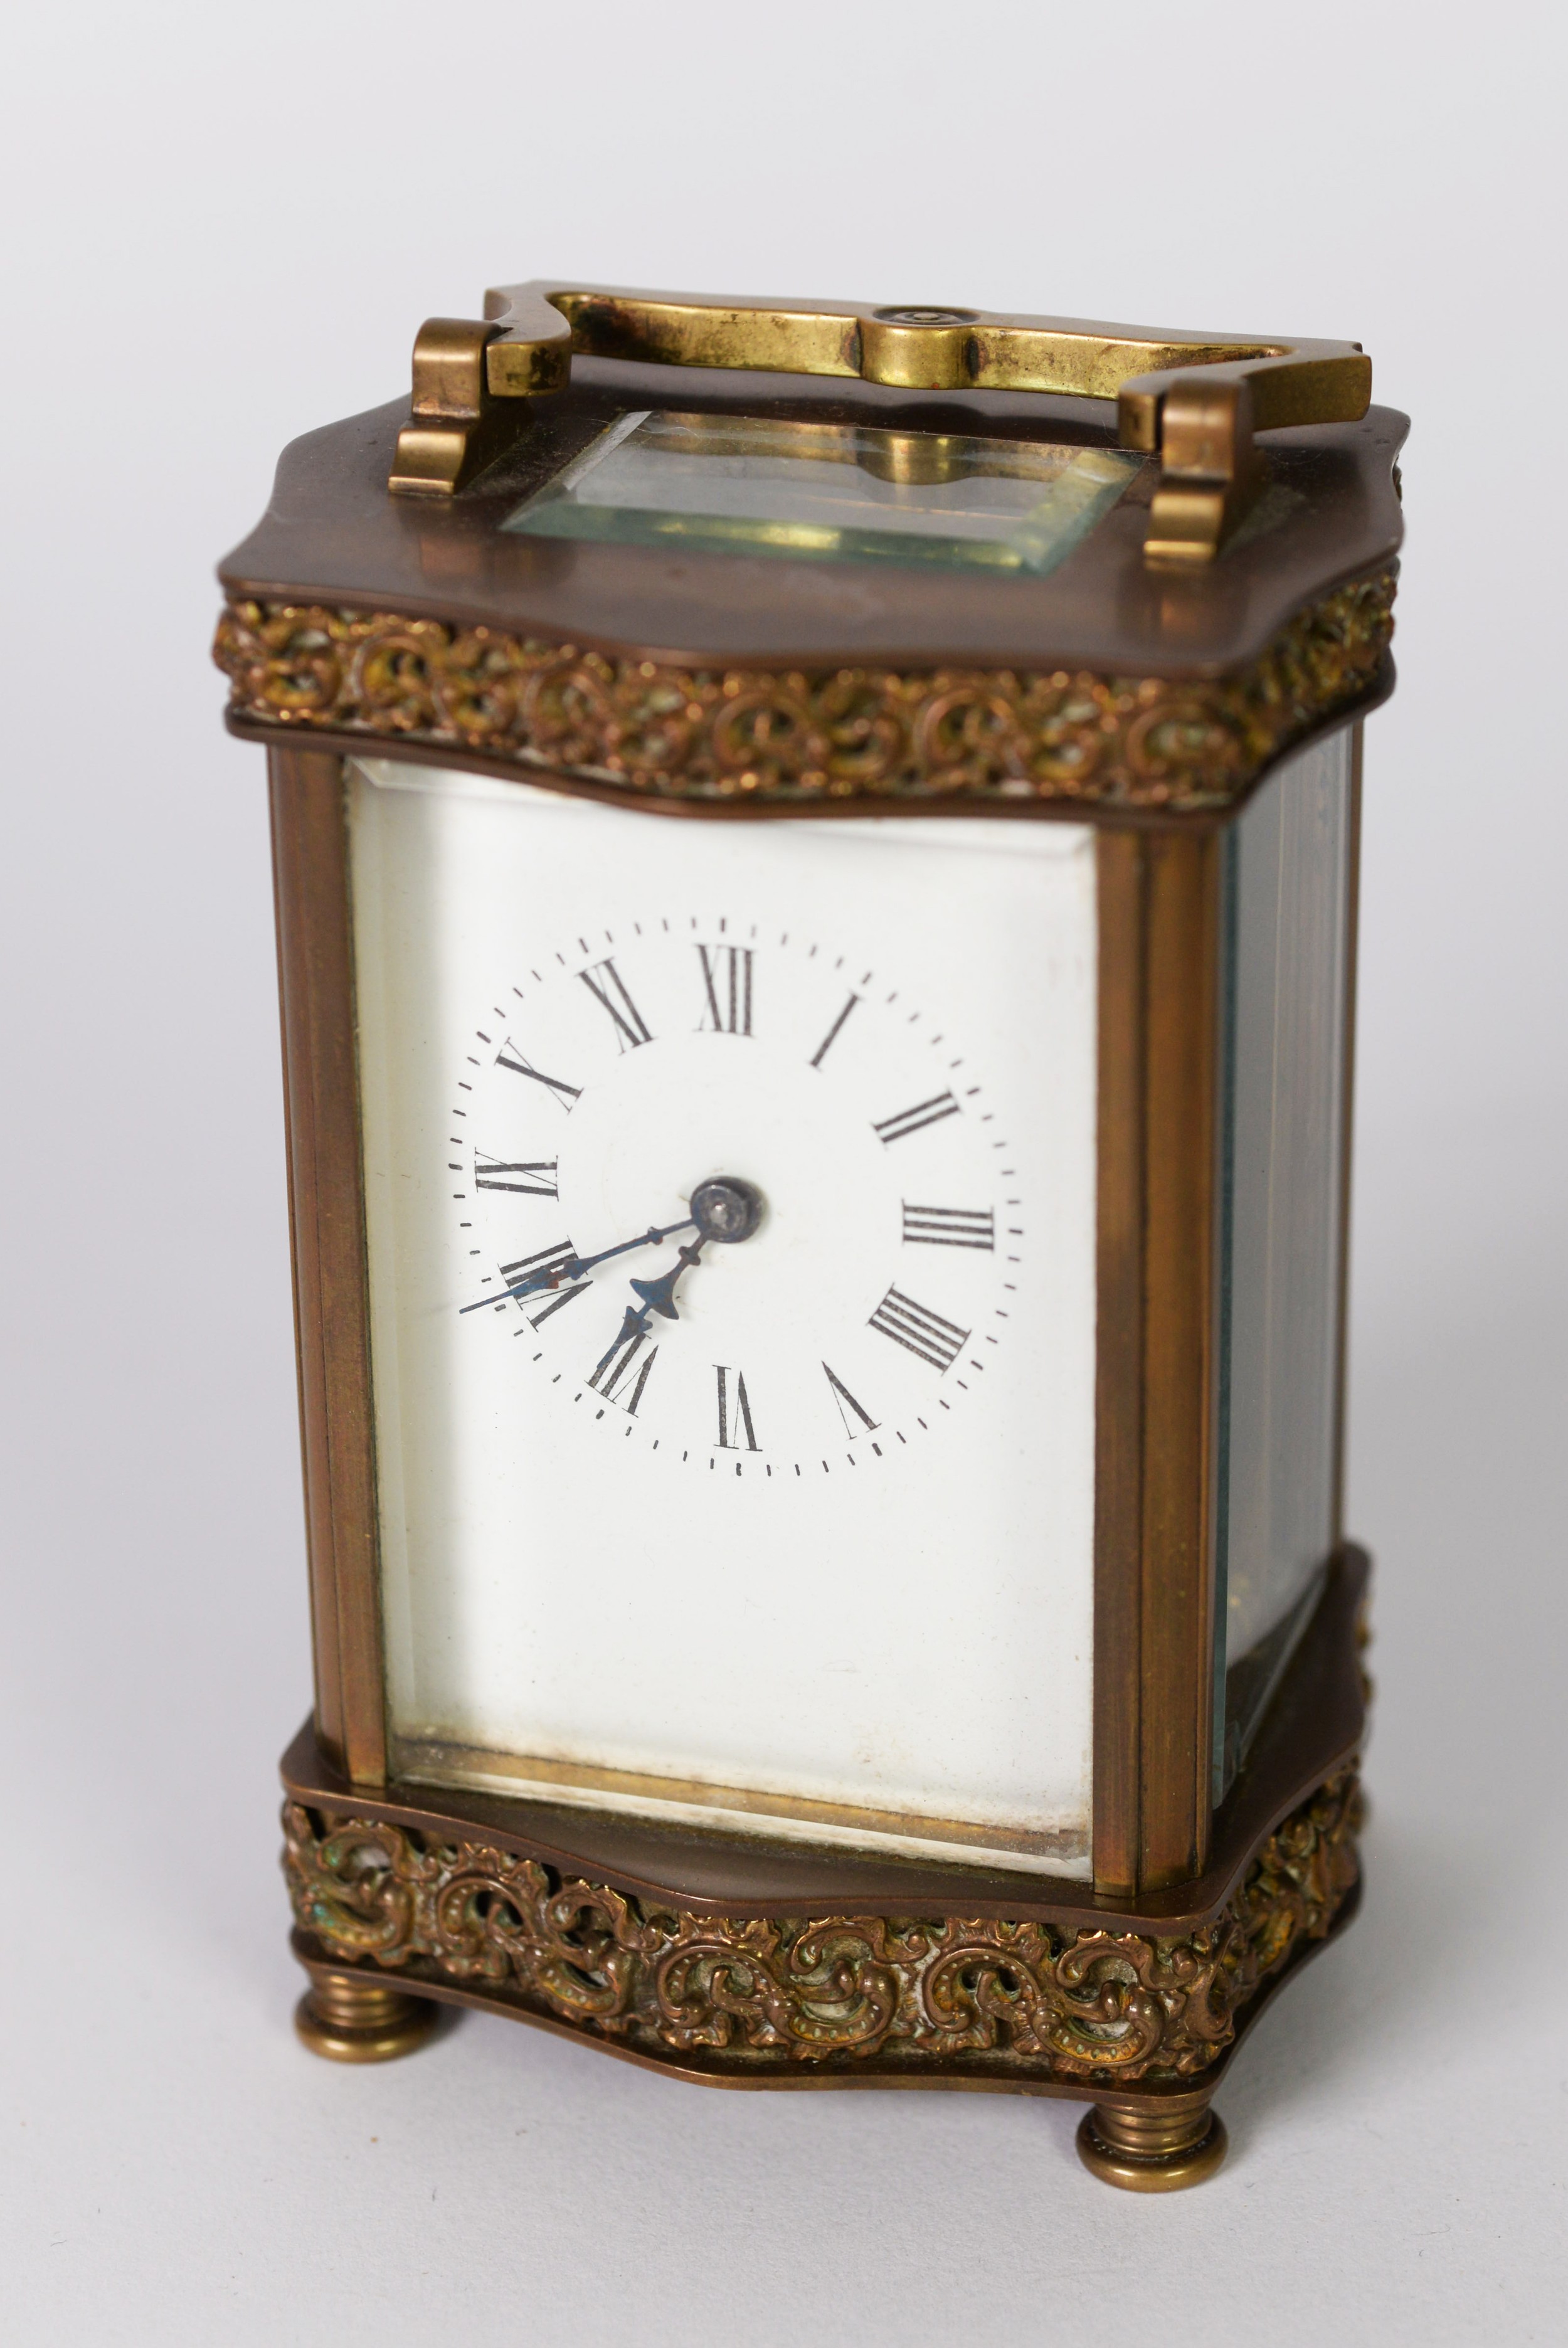 EARLY 20th CENTURY GILT BRASS DECORATIVE CARRIAGE CLOCK, the serpentine sided top and bottom applied